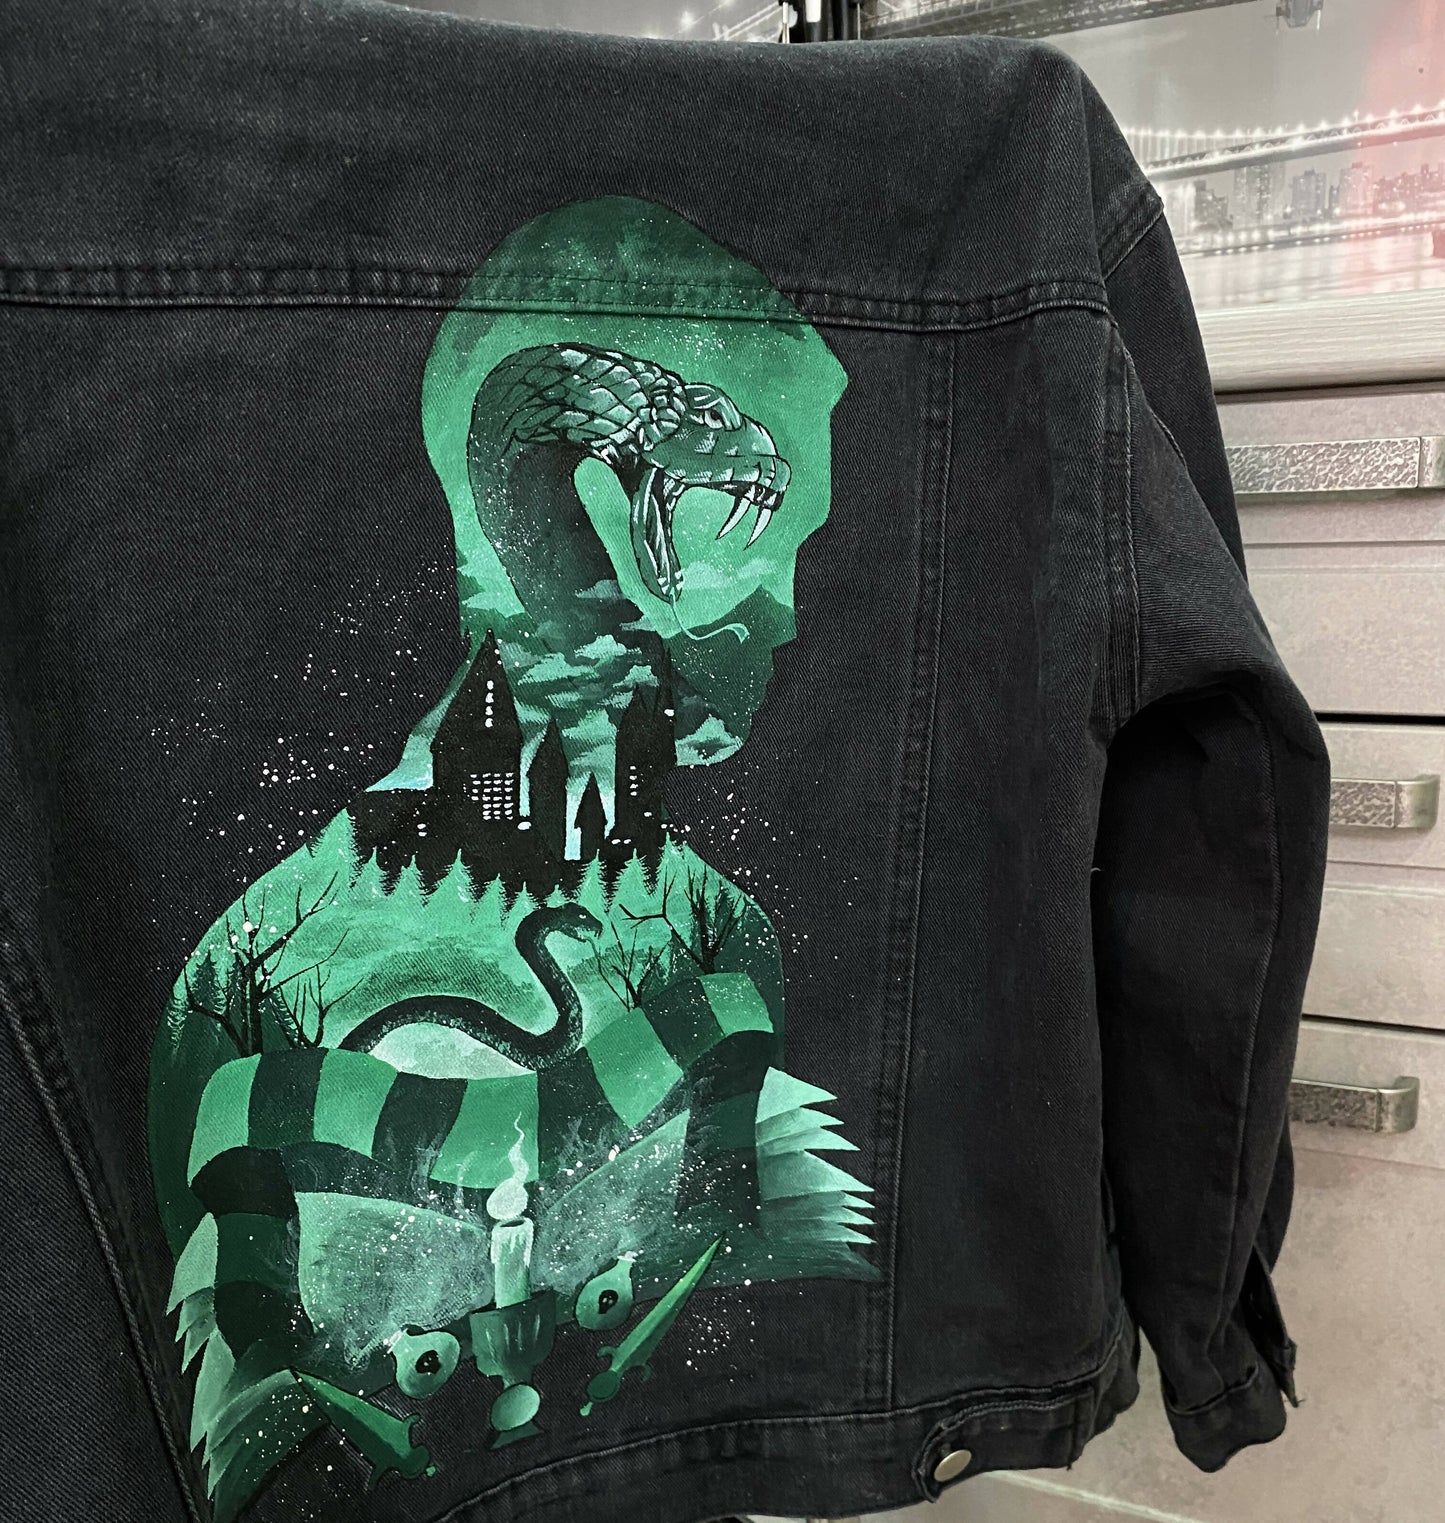 "Emerald Viper" Hand-Painted Jeans Jacket